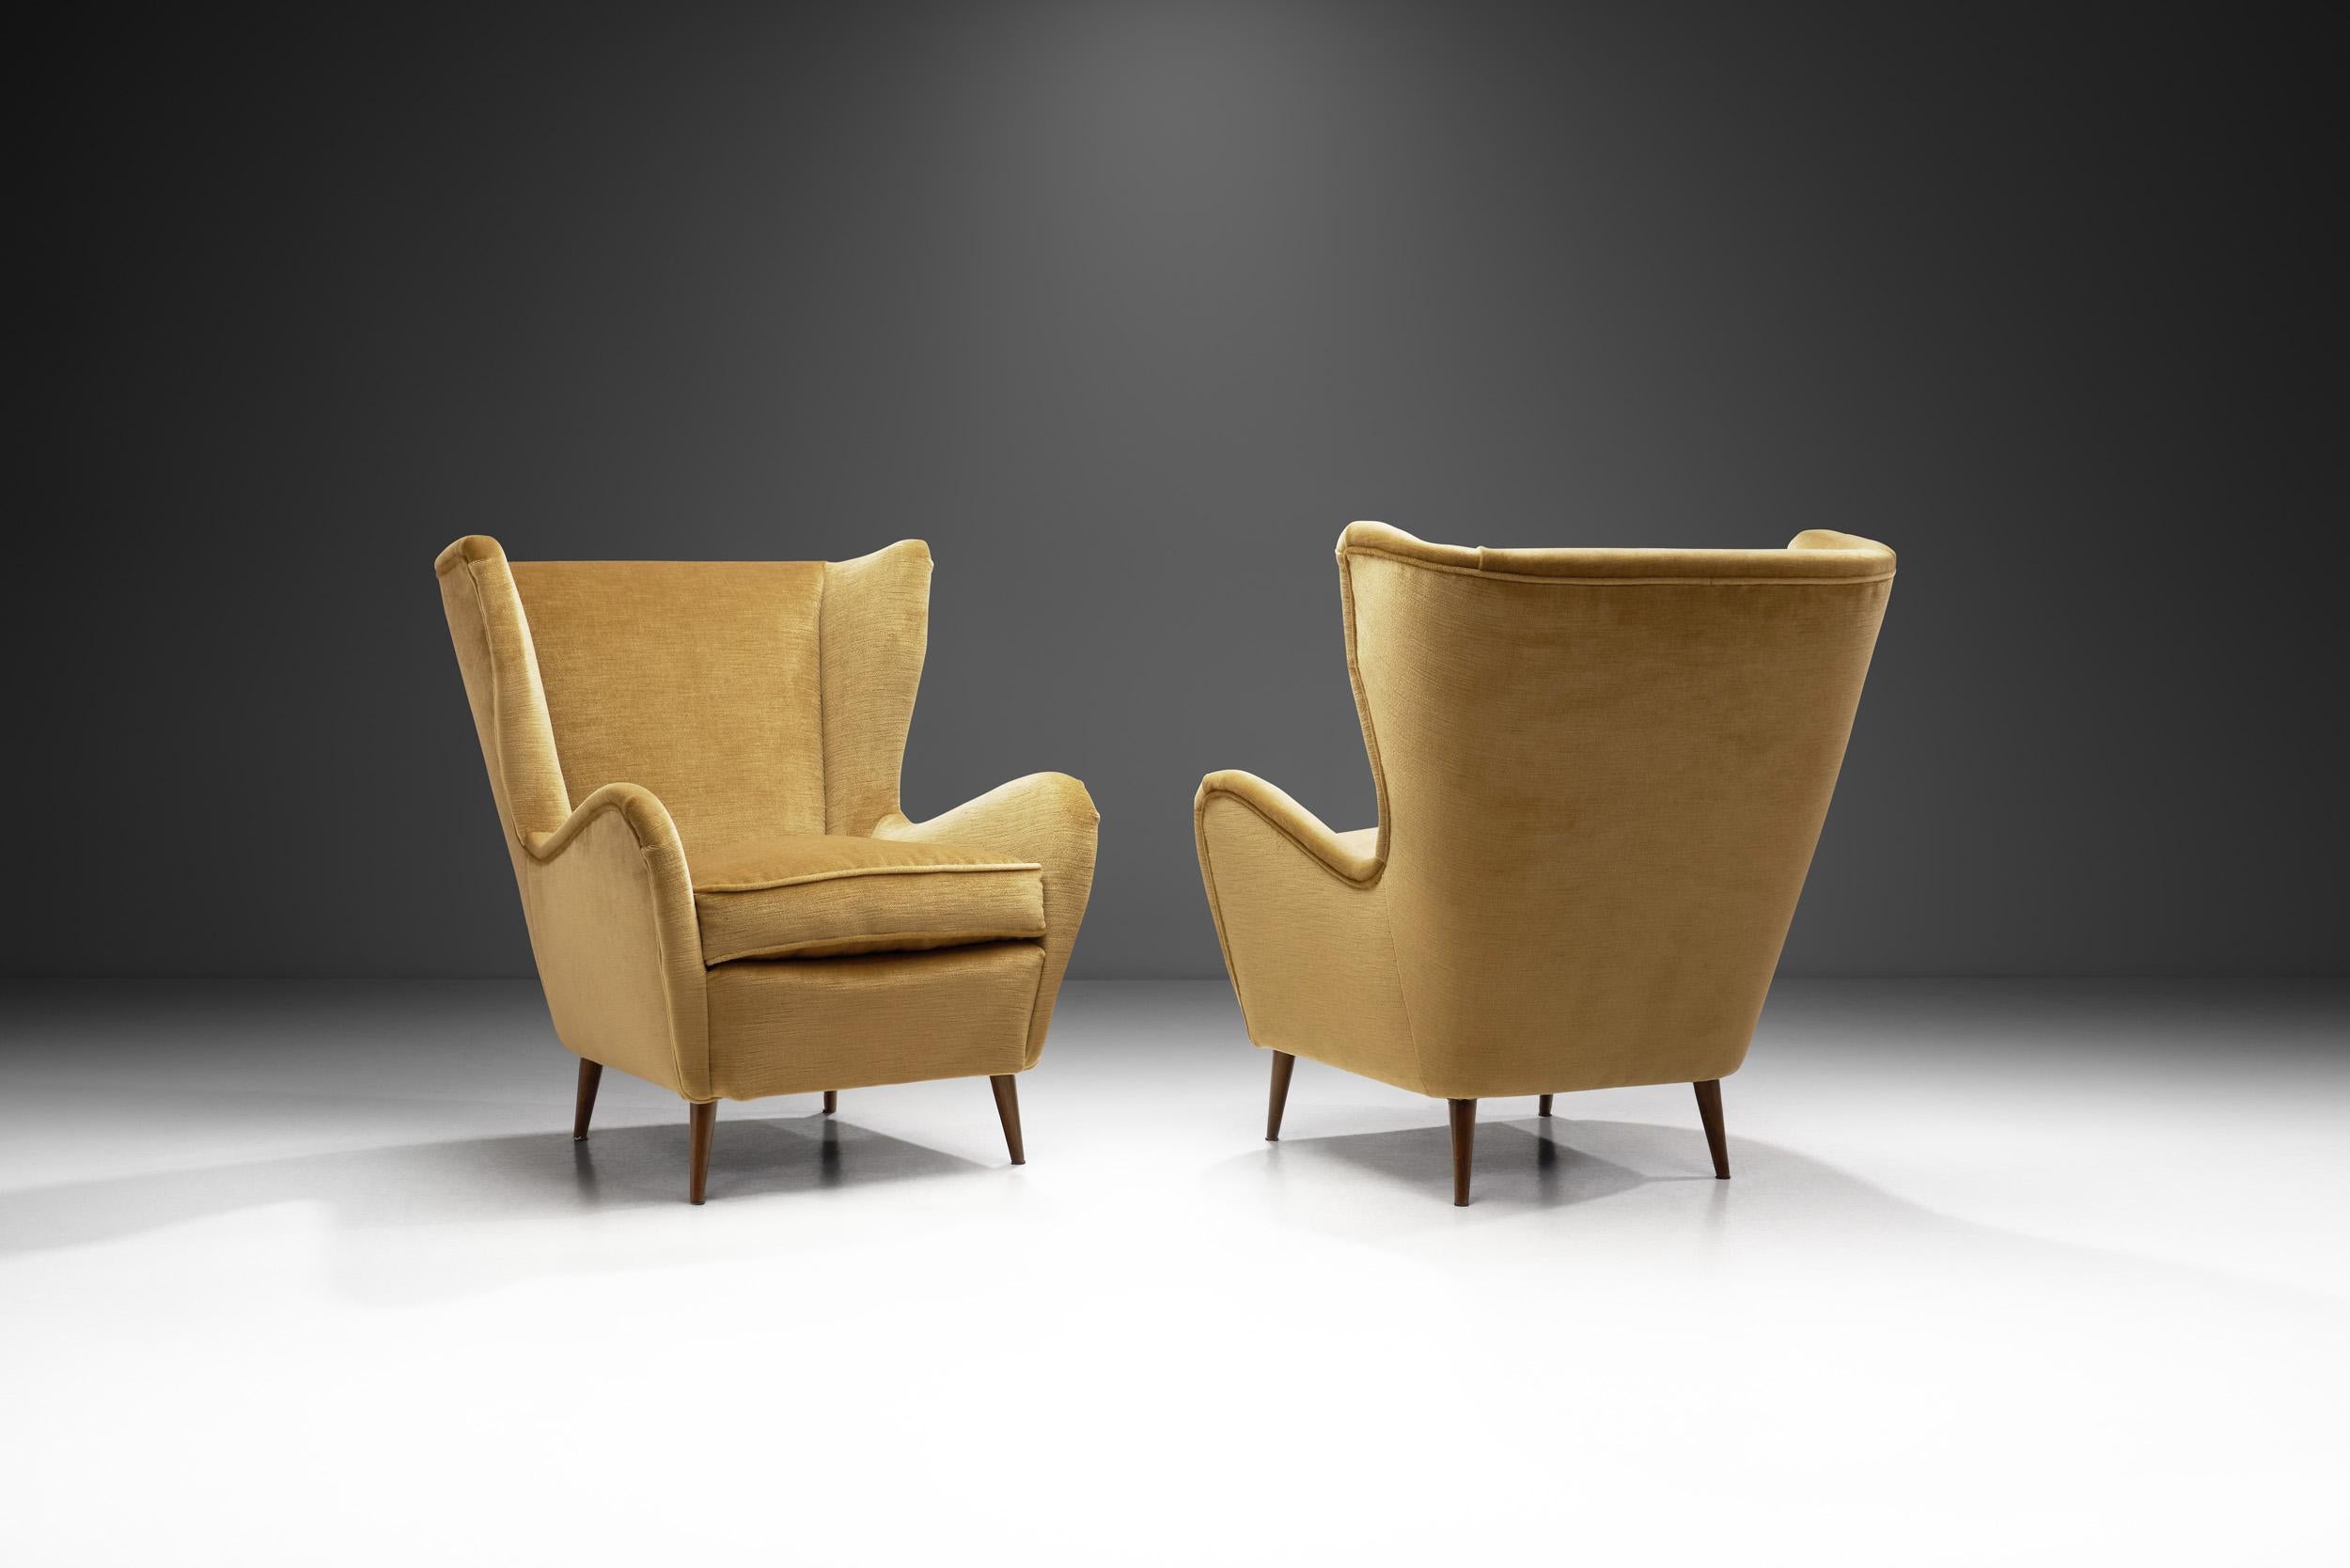 Italian furniture from the mid-century era is defined by an elegant design aesthetic, perfect execution, and exclusivity. This pair of lounge chairs has a design language that is coherent with current times, yet it is also congenial to the wisdom of